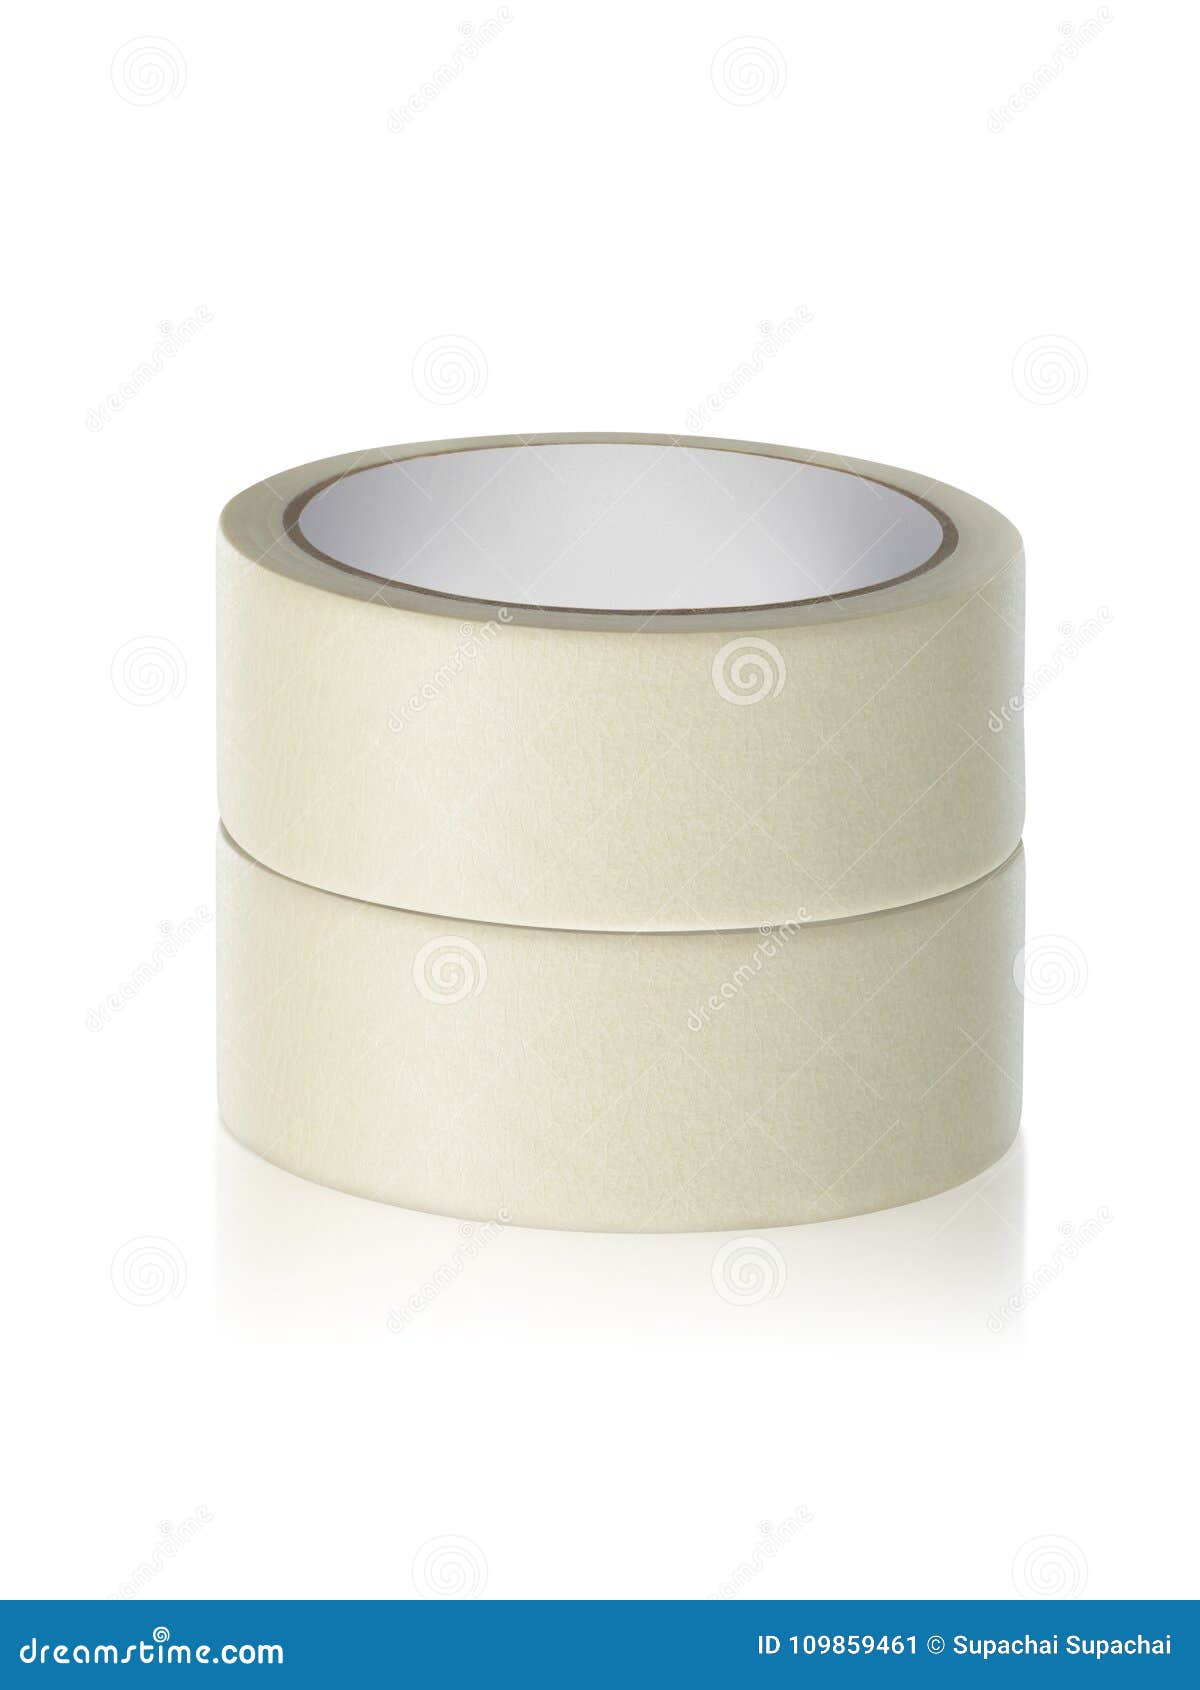 Roll Adhesive Tape, On Isolated White Background Stock Image - Image of